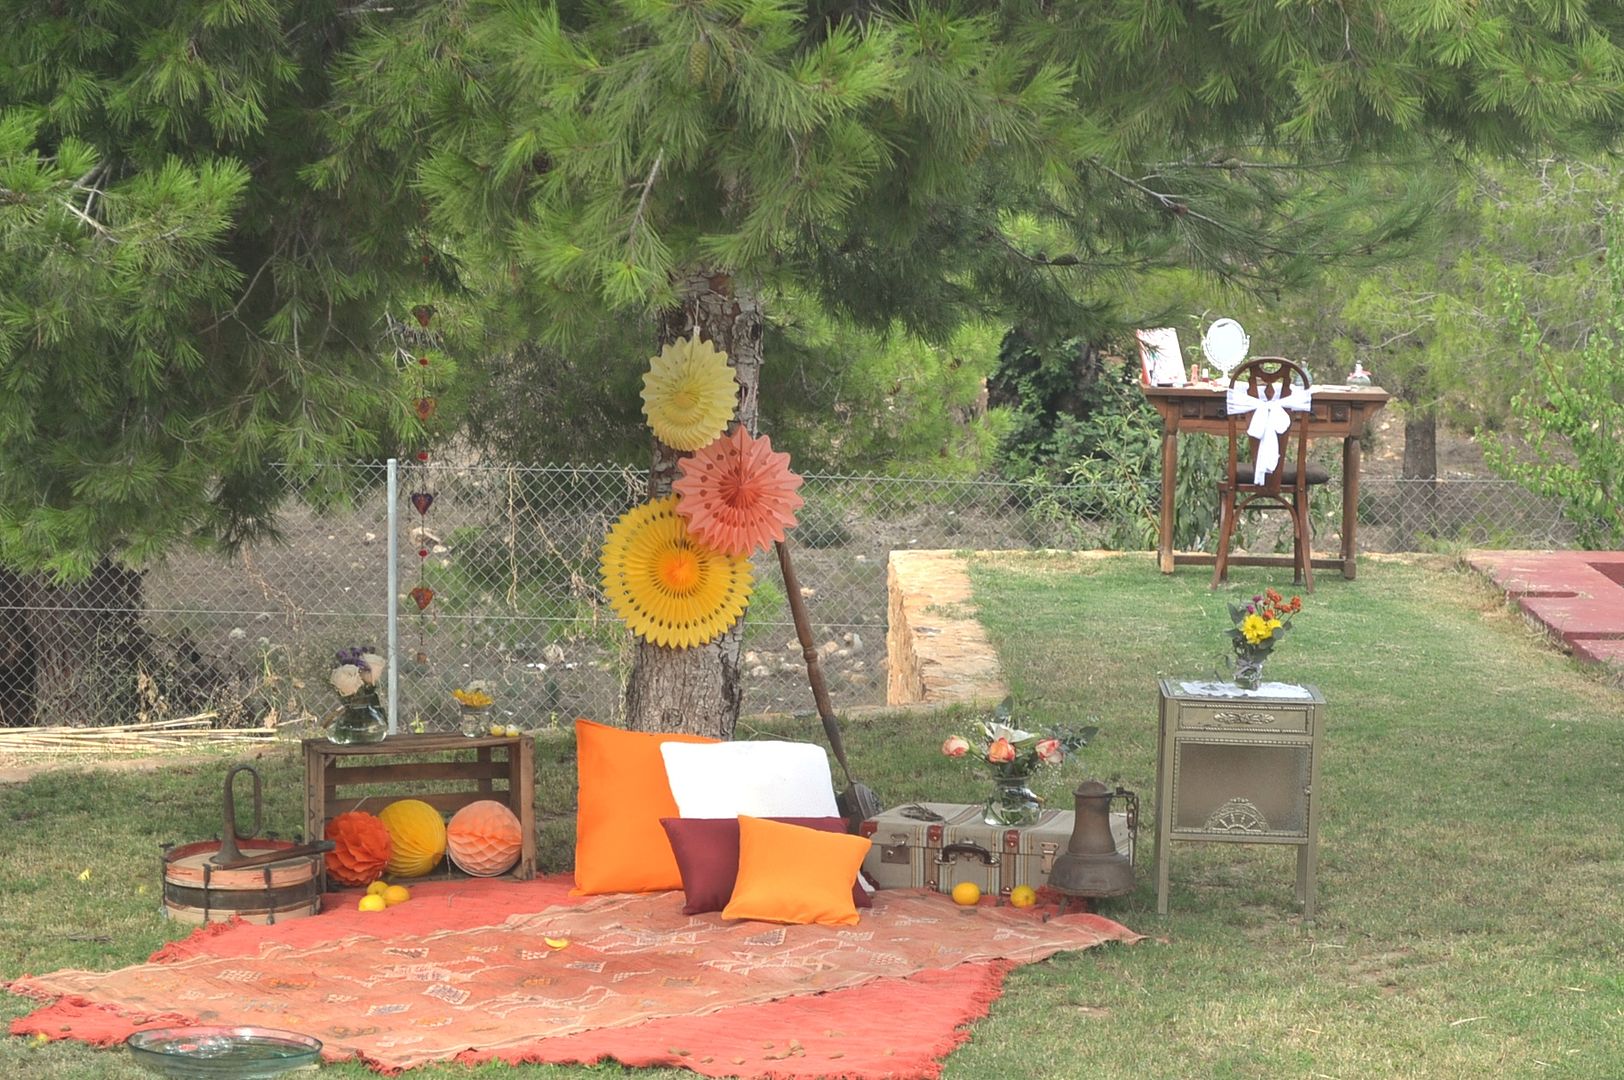  photo chillout-wedding-planner-Joanna-Ferrero-cheap-and-cool-boda-hippy-chic-rural-natural-vinage3_zps7cec268b.jpg